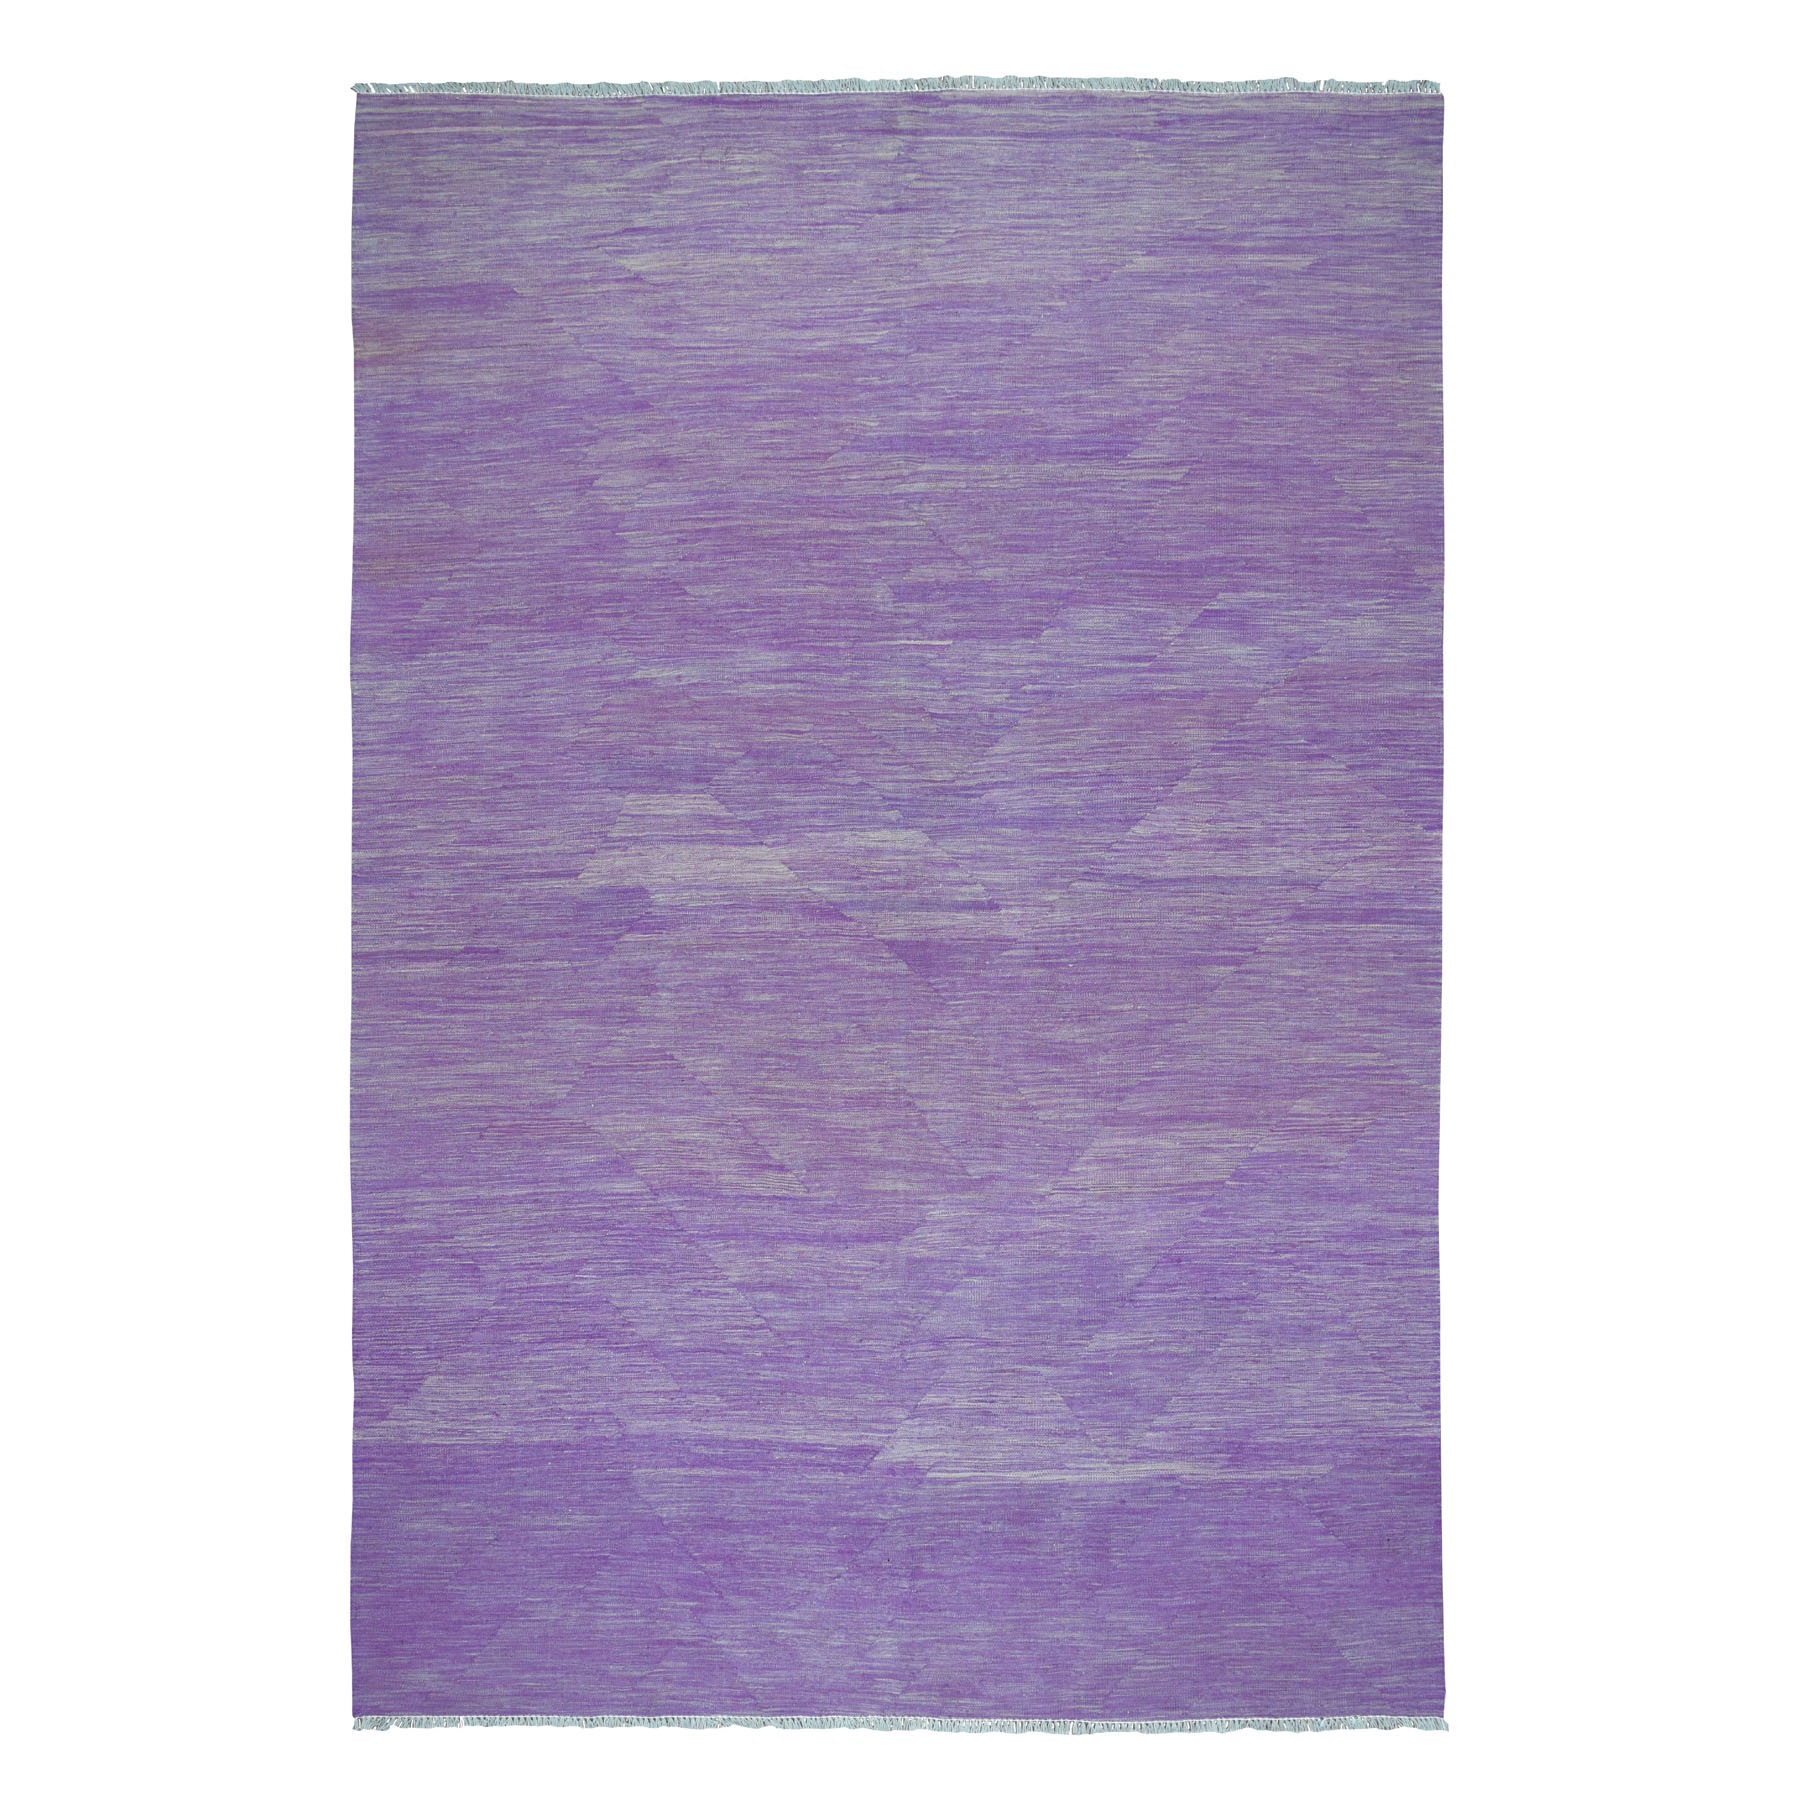 Modern & Contemporary Wool Hand-Woven Area Rug 6'8